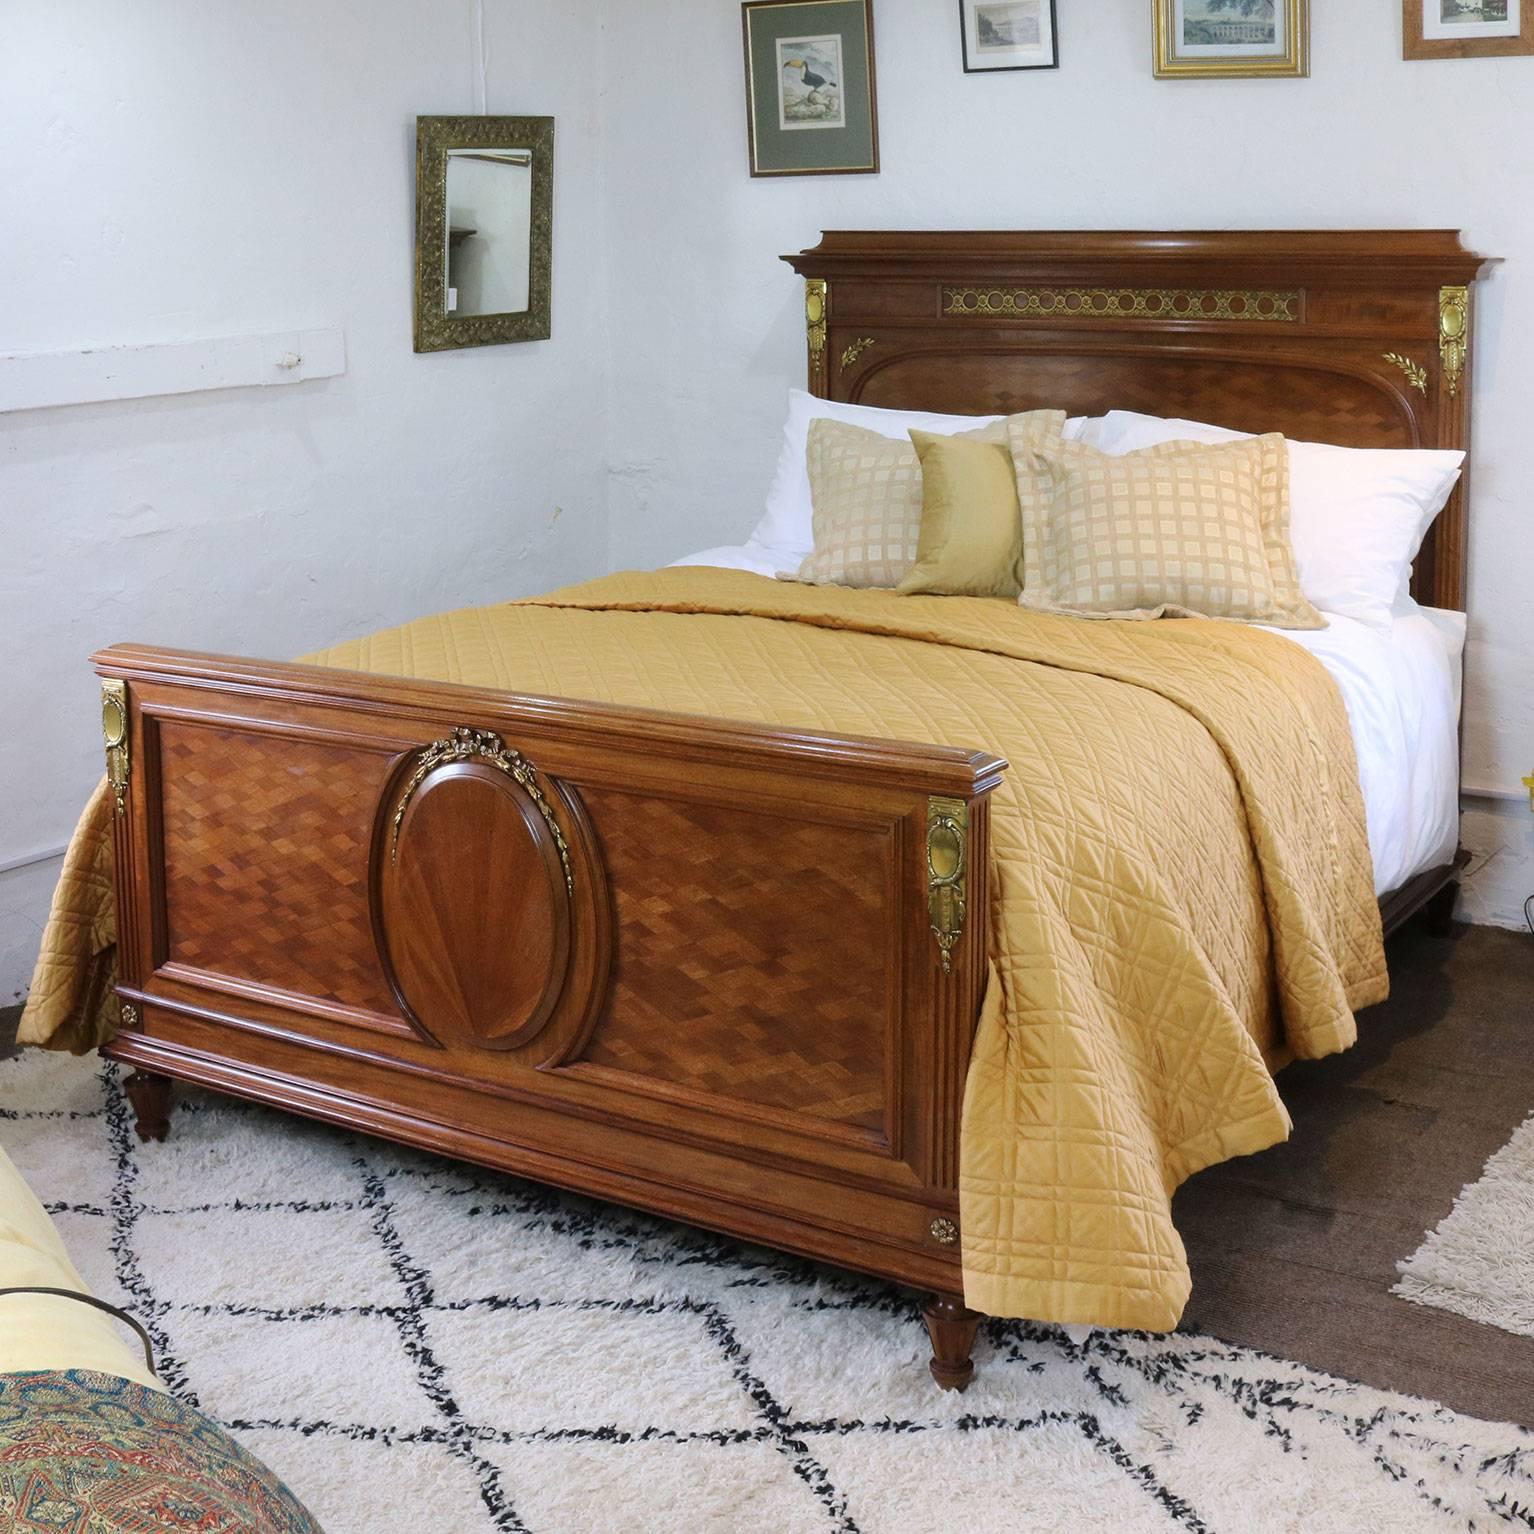 A fine inlaid bed with panels containing superb parquetry work, a central oval panel with sunburst veneer and fine ormolu.

This bed accepts a British king-size or American queen-size (60 inches wide, 5ft or 150 cm) base and mattress.

The price is